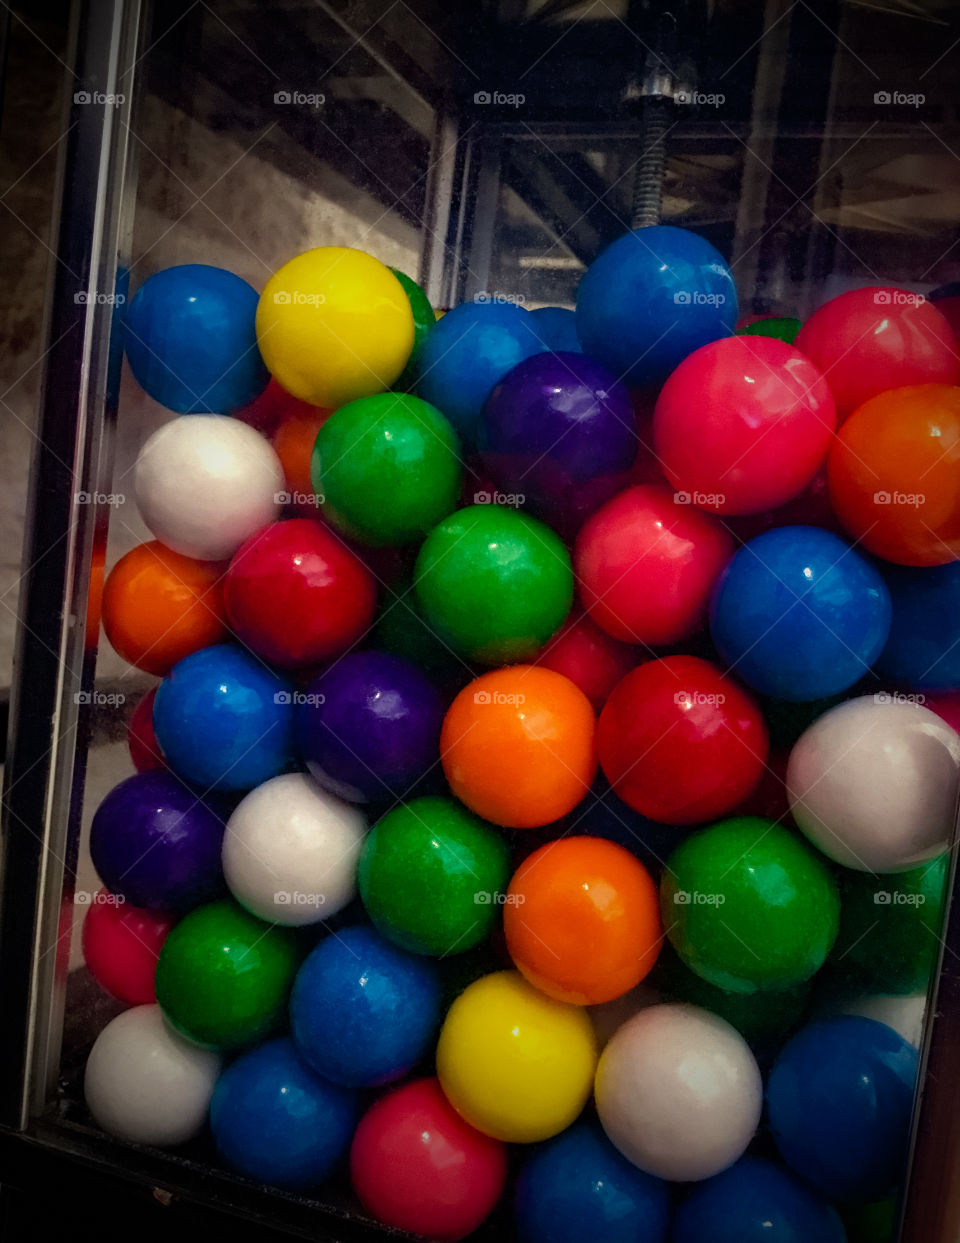 A colorful, vibrant gumball machine - looking through the glass.